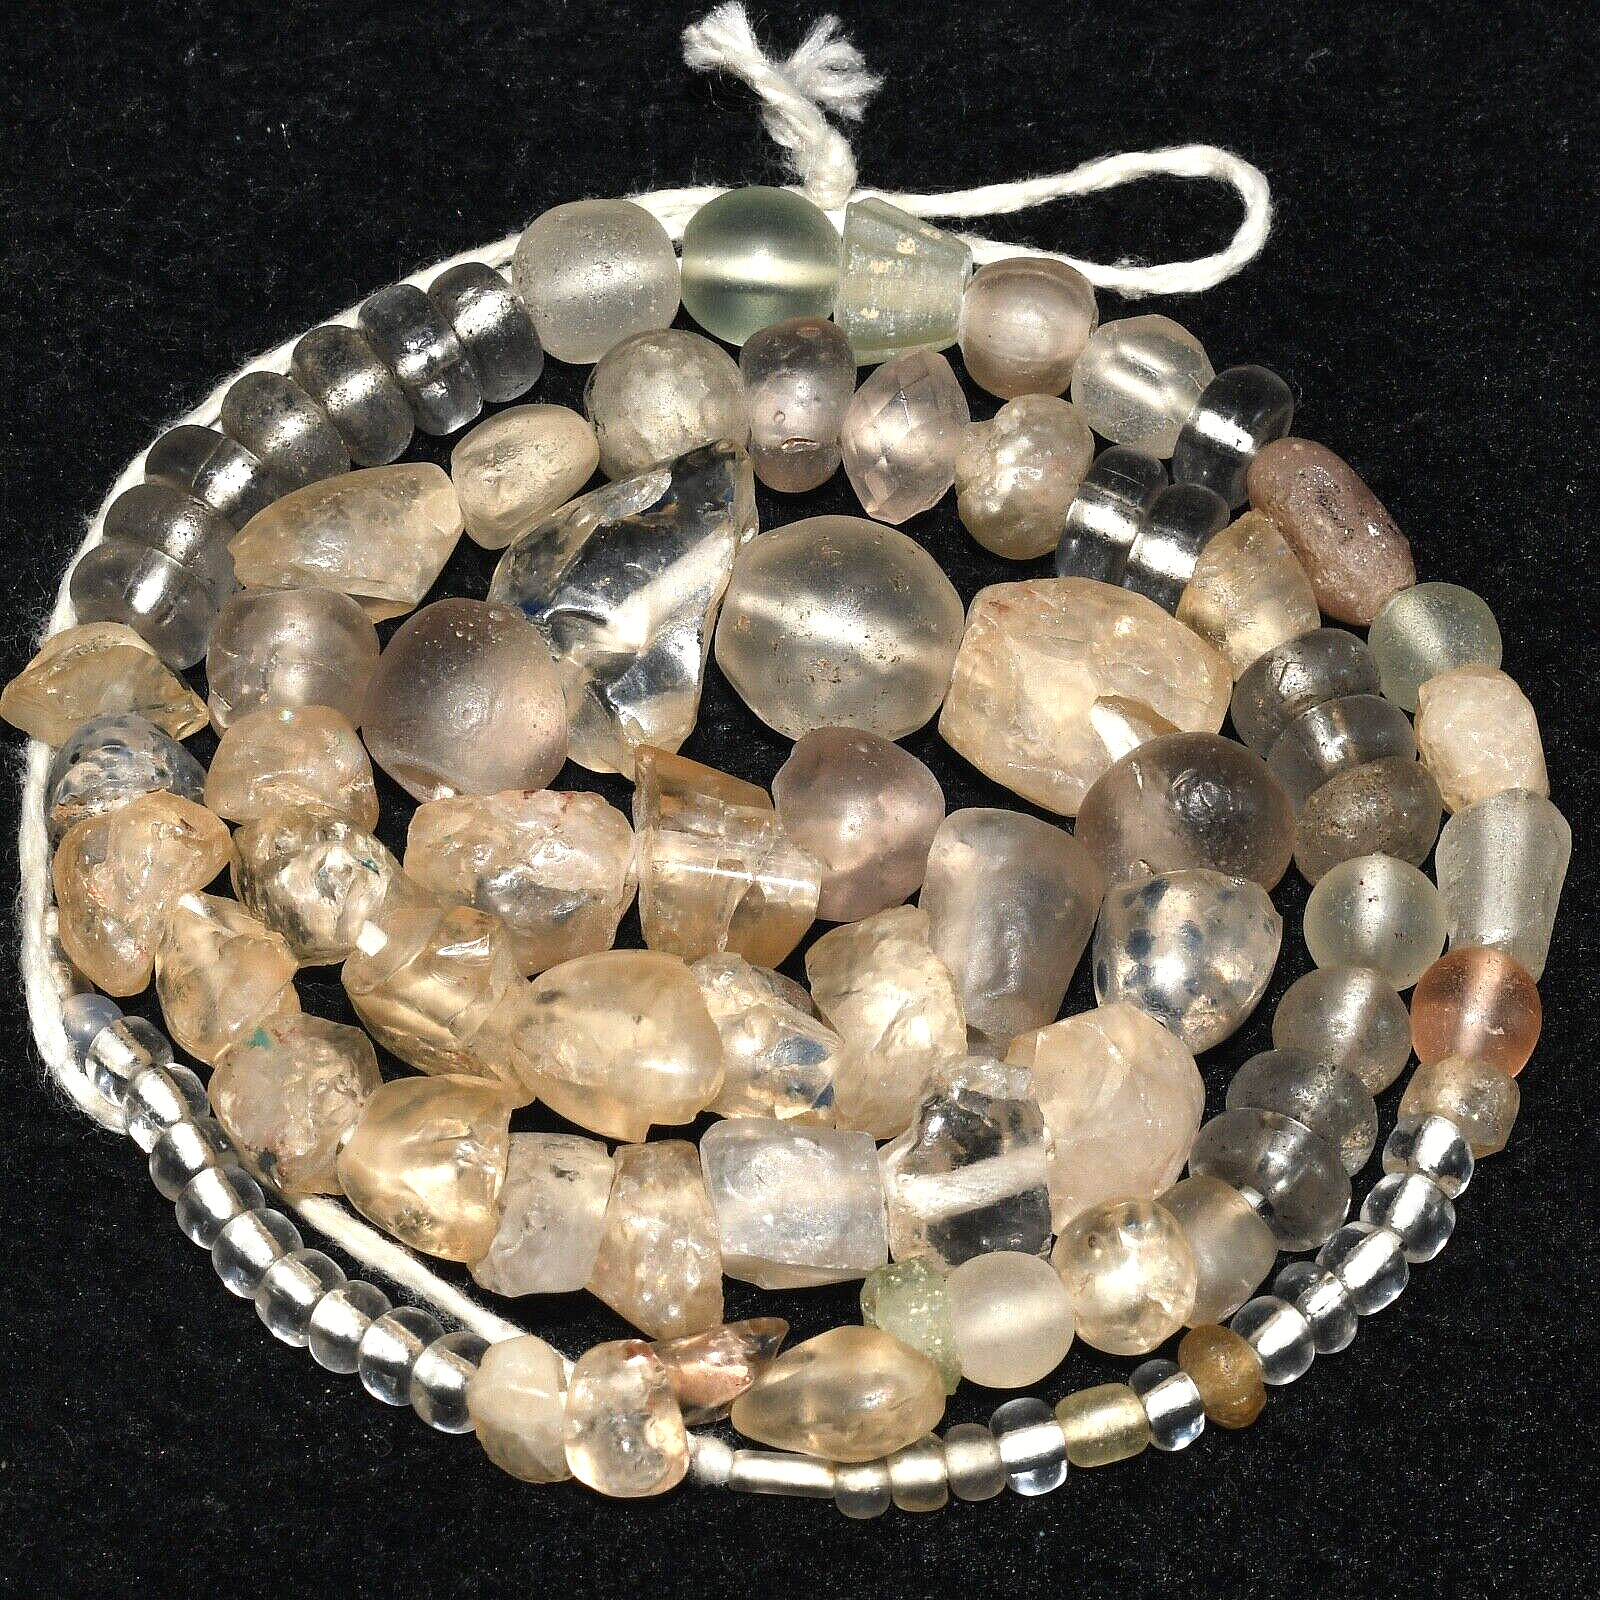 Genuine Ancient Natural Roman Crystal Beads Necklace with Vibrant Colors